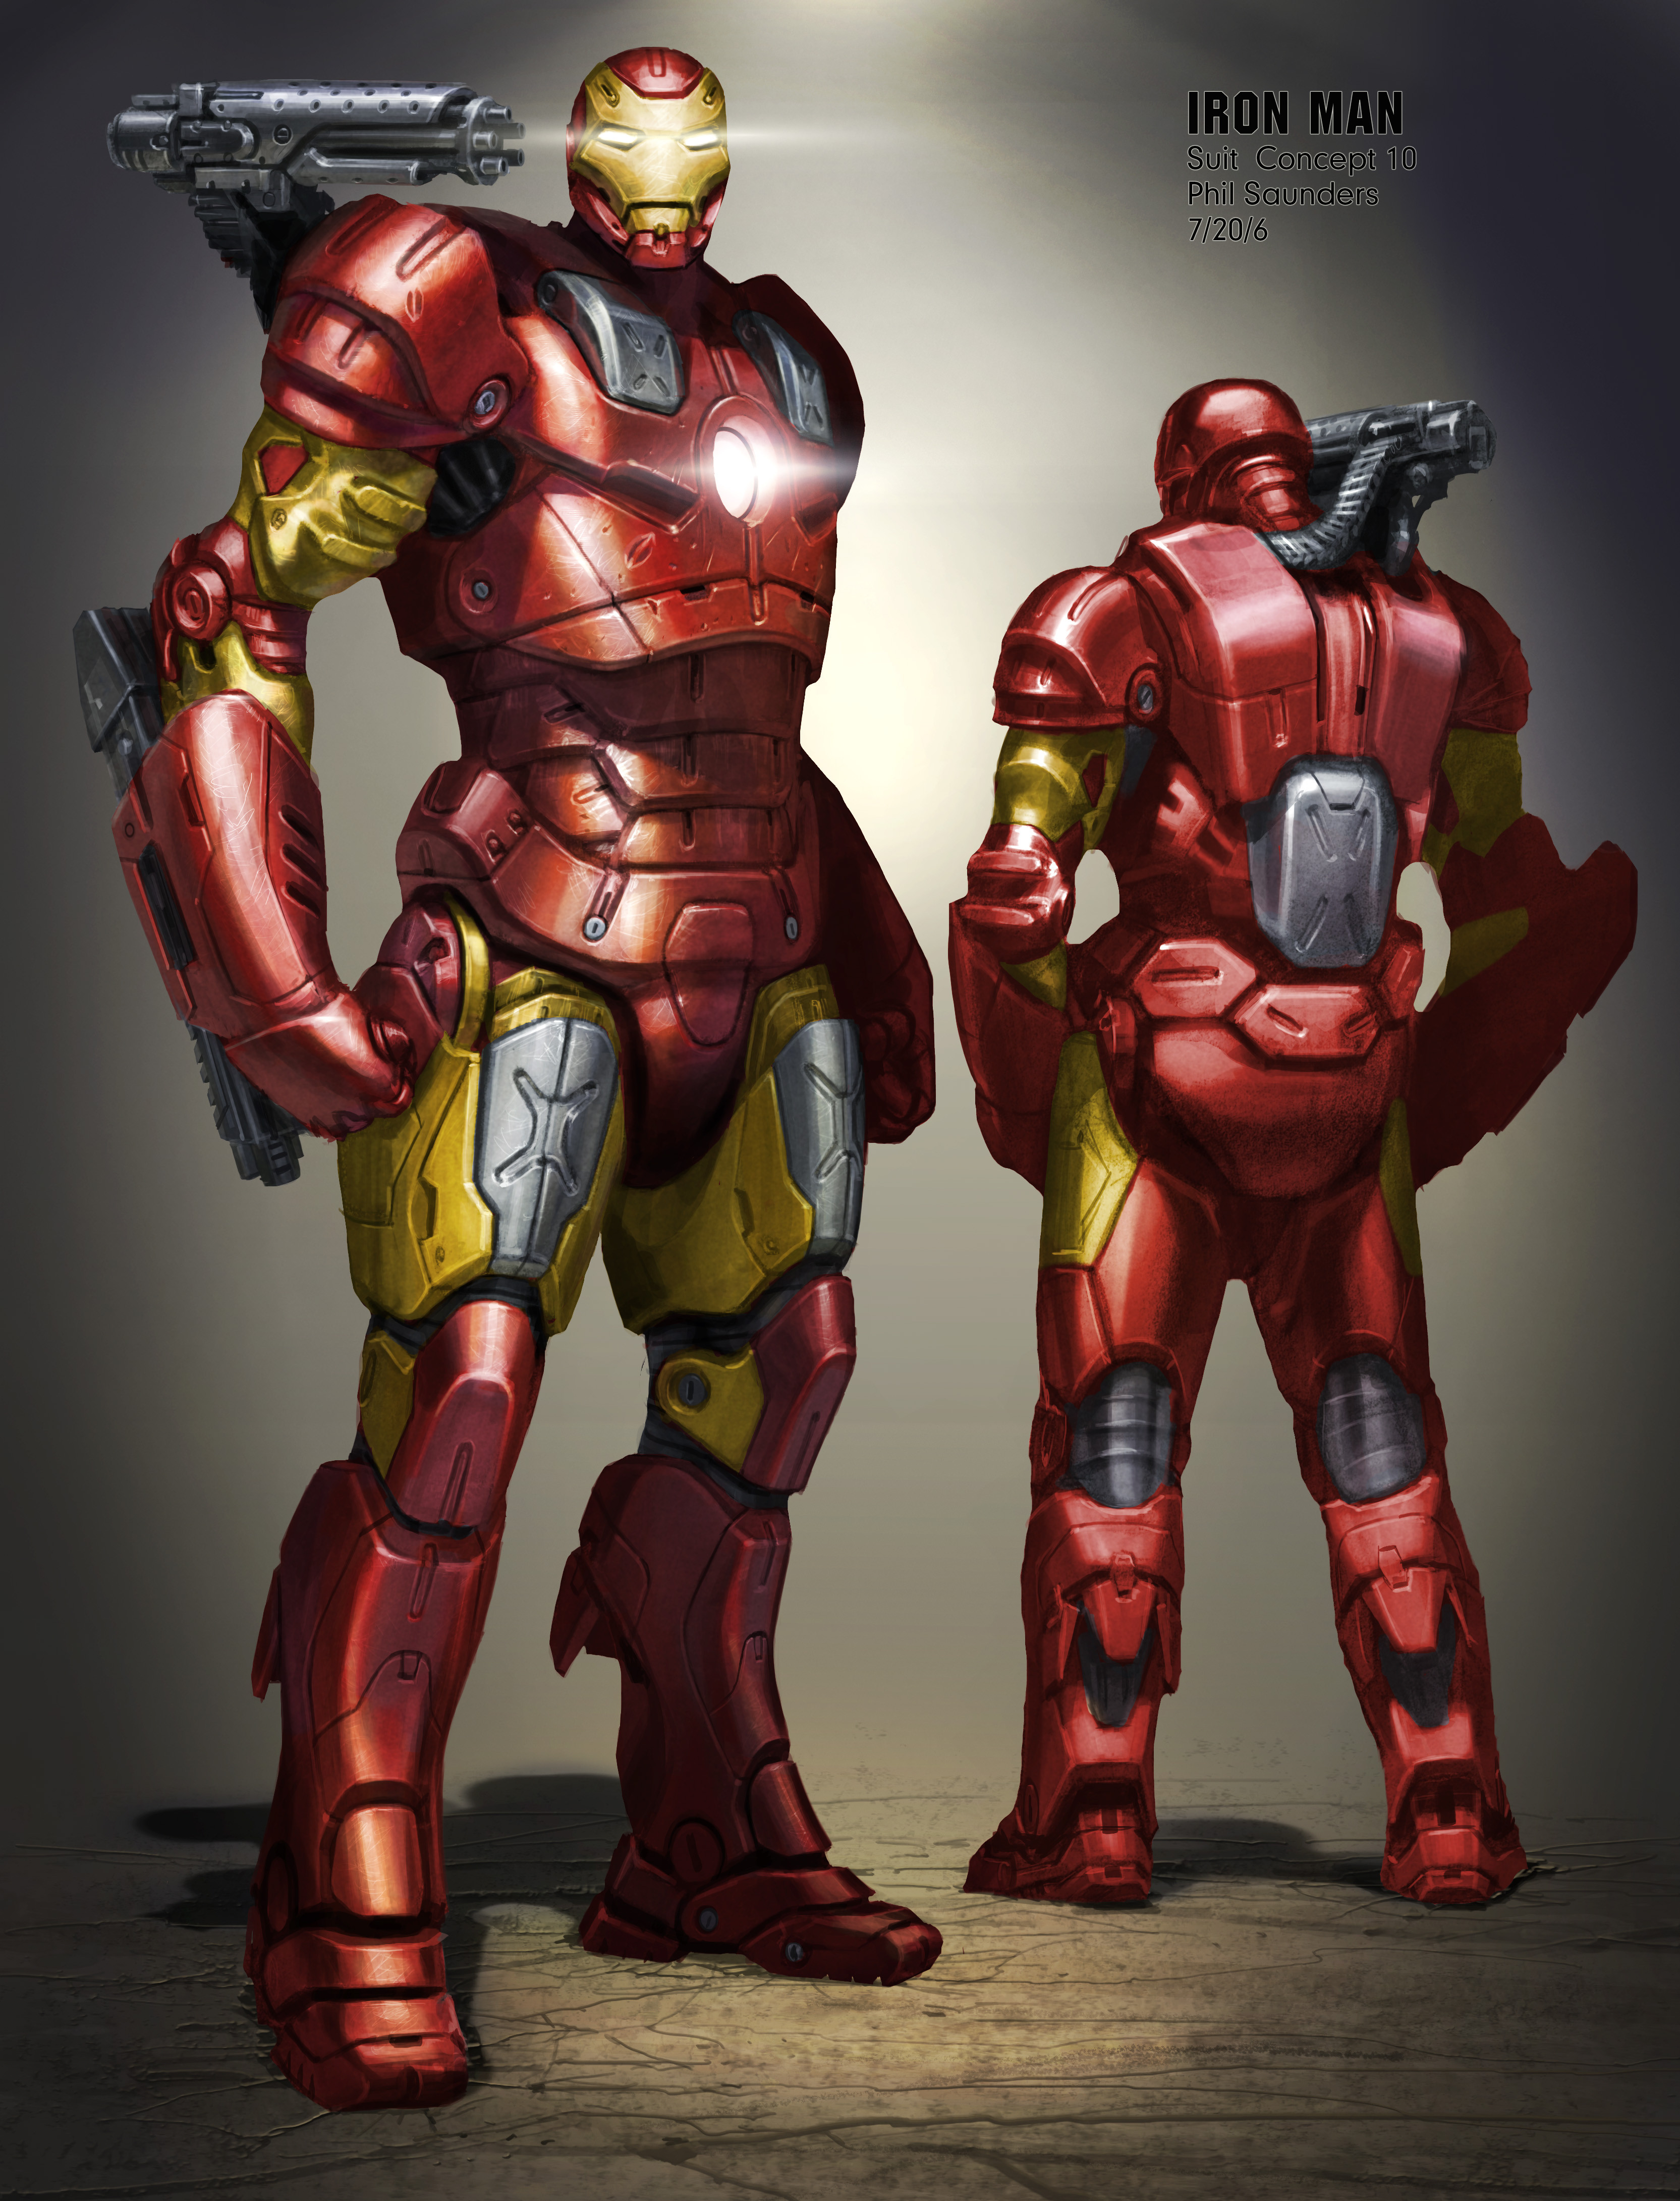 Another War Machine cladding sketch, this one started in pencil, then scanned and painted over in Photoshop.